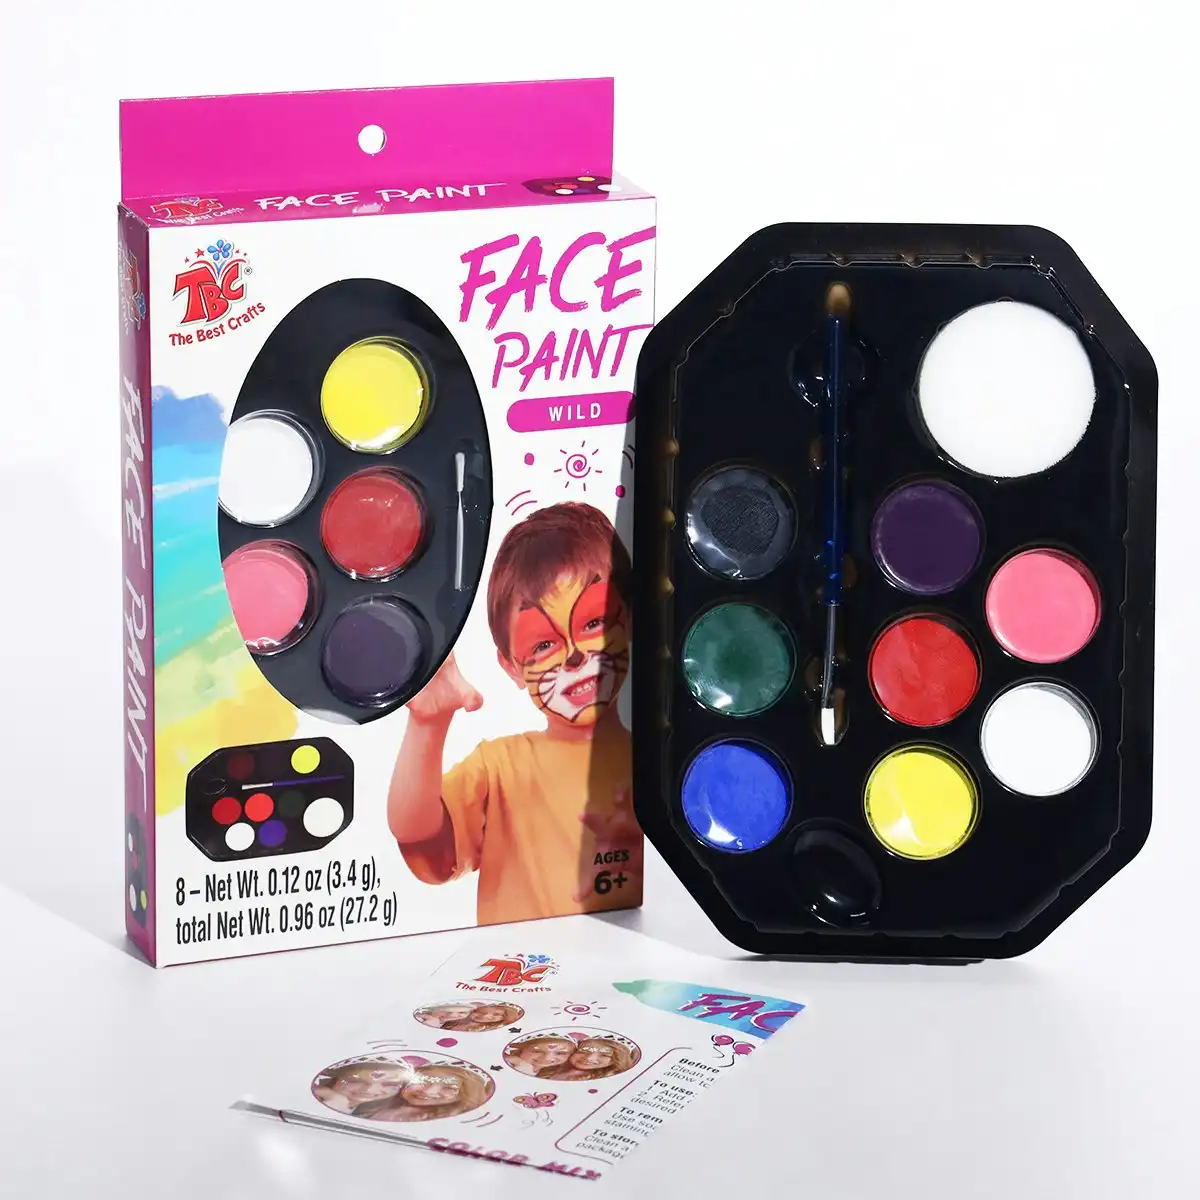 The Best Craft Face Paint - Wild